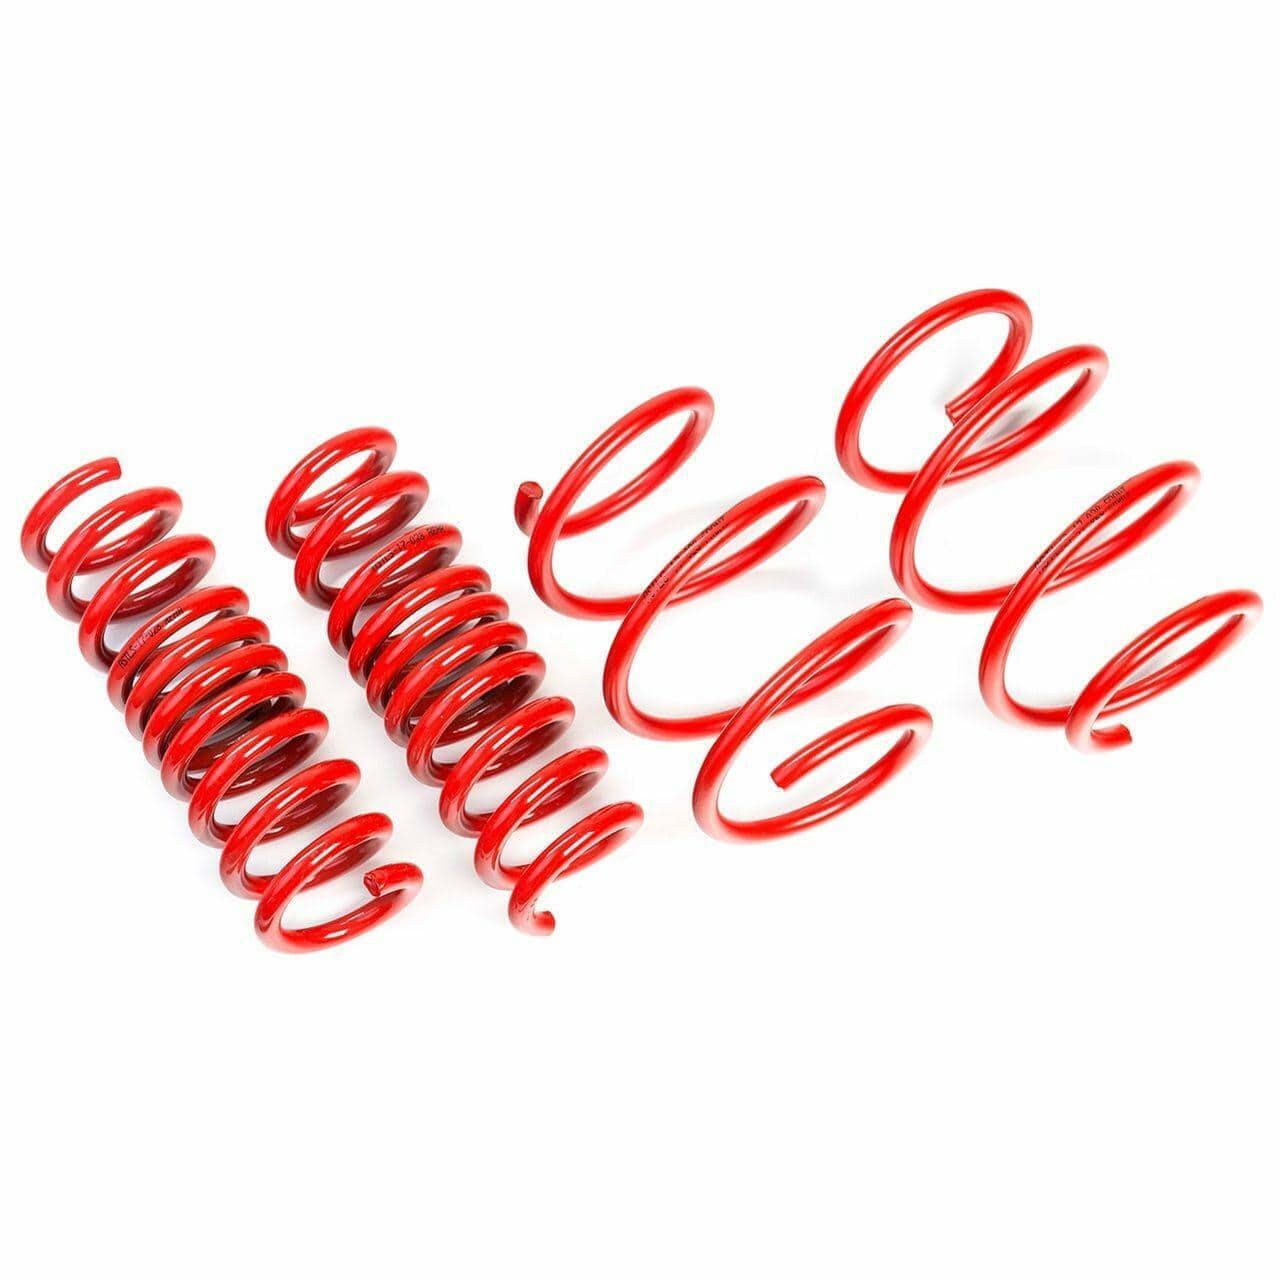 AST Suspension Lowering Springs (40MM/40MM) - 1982-1986 Mazda 626 LIM/Coupe (GC) ASTLS-14-1150